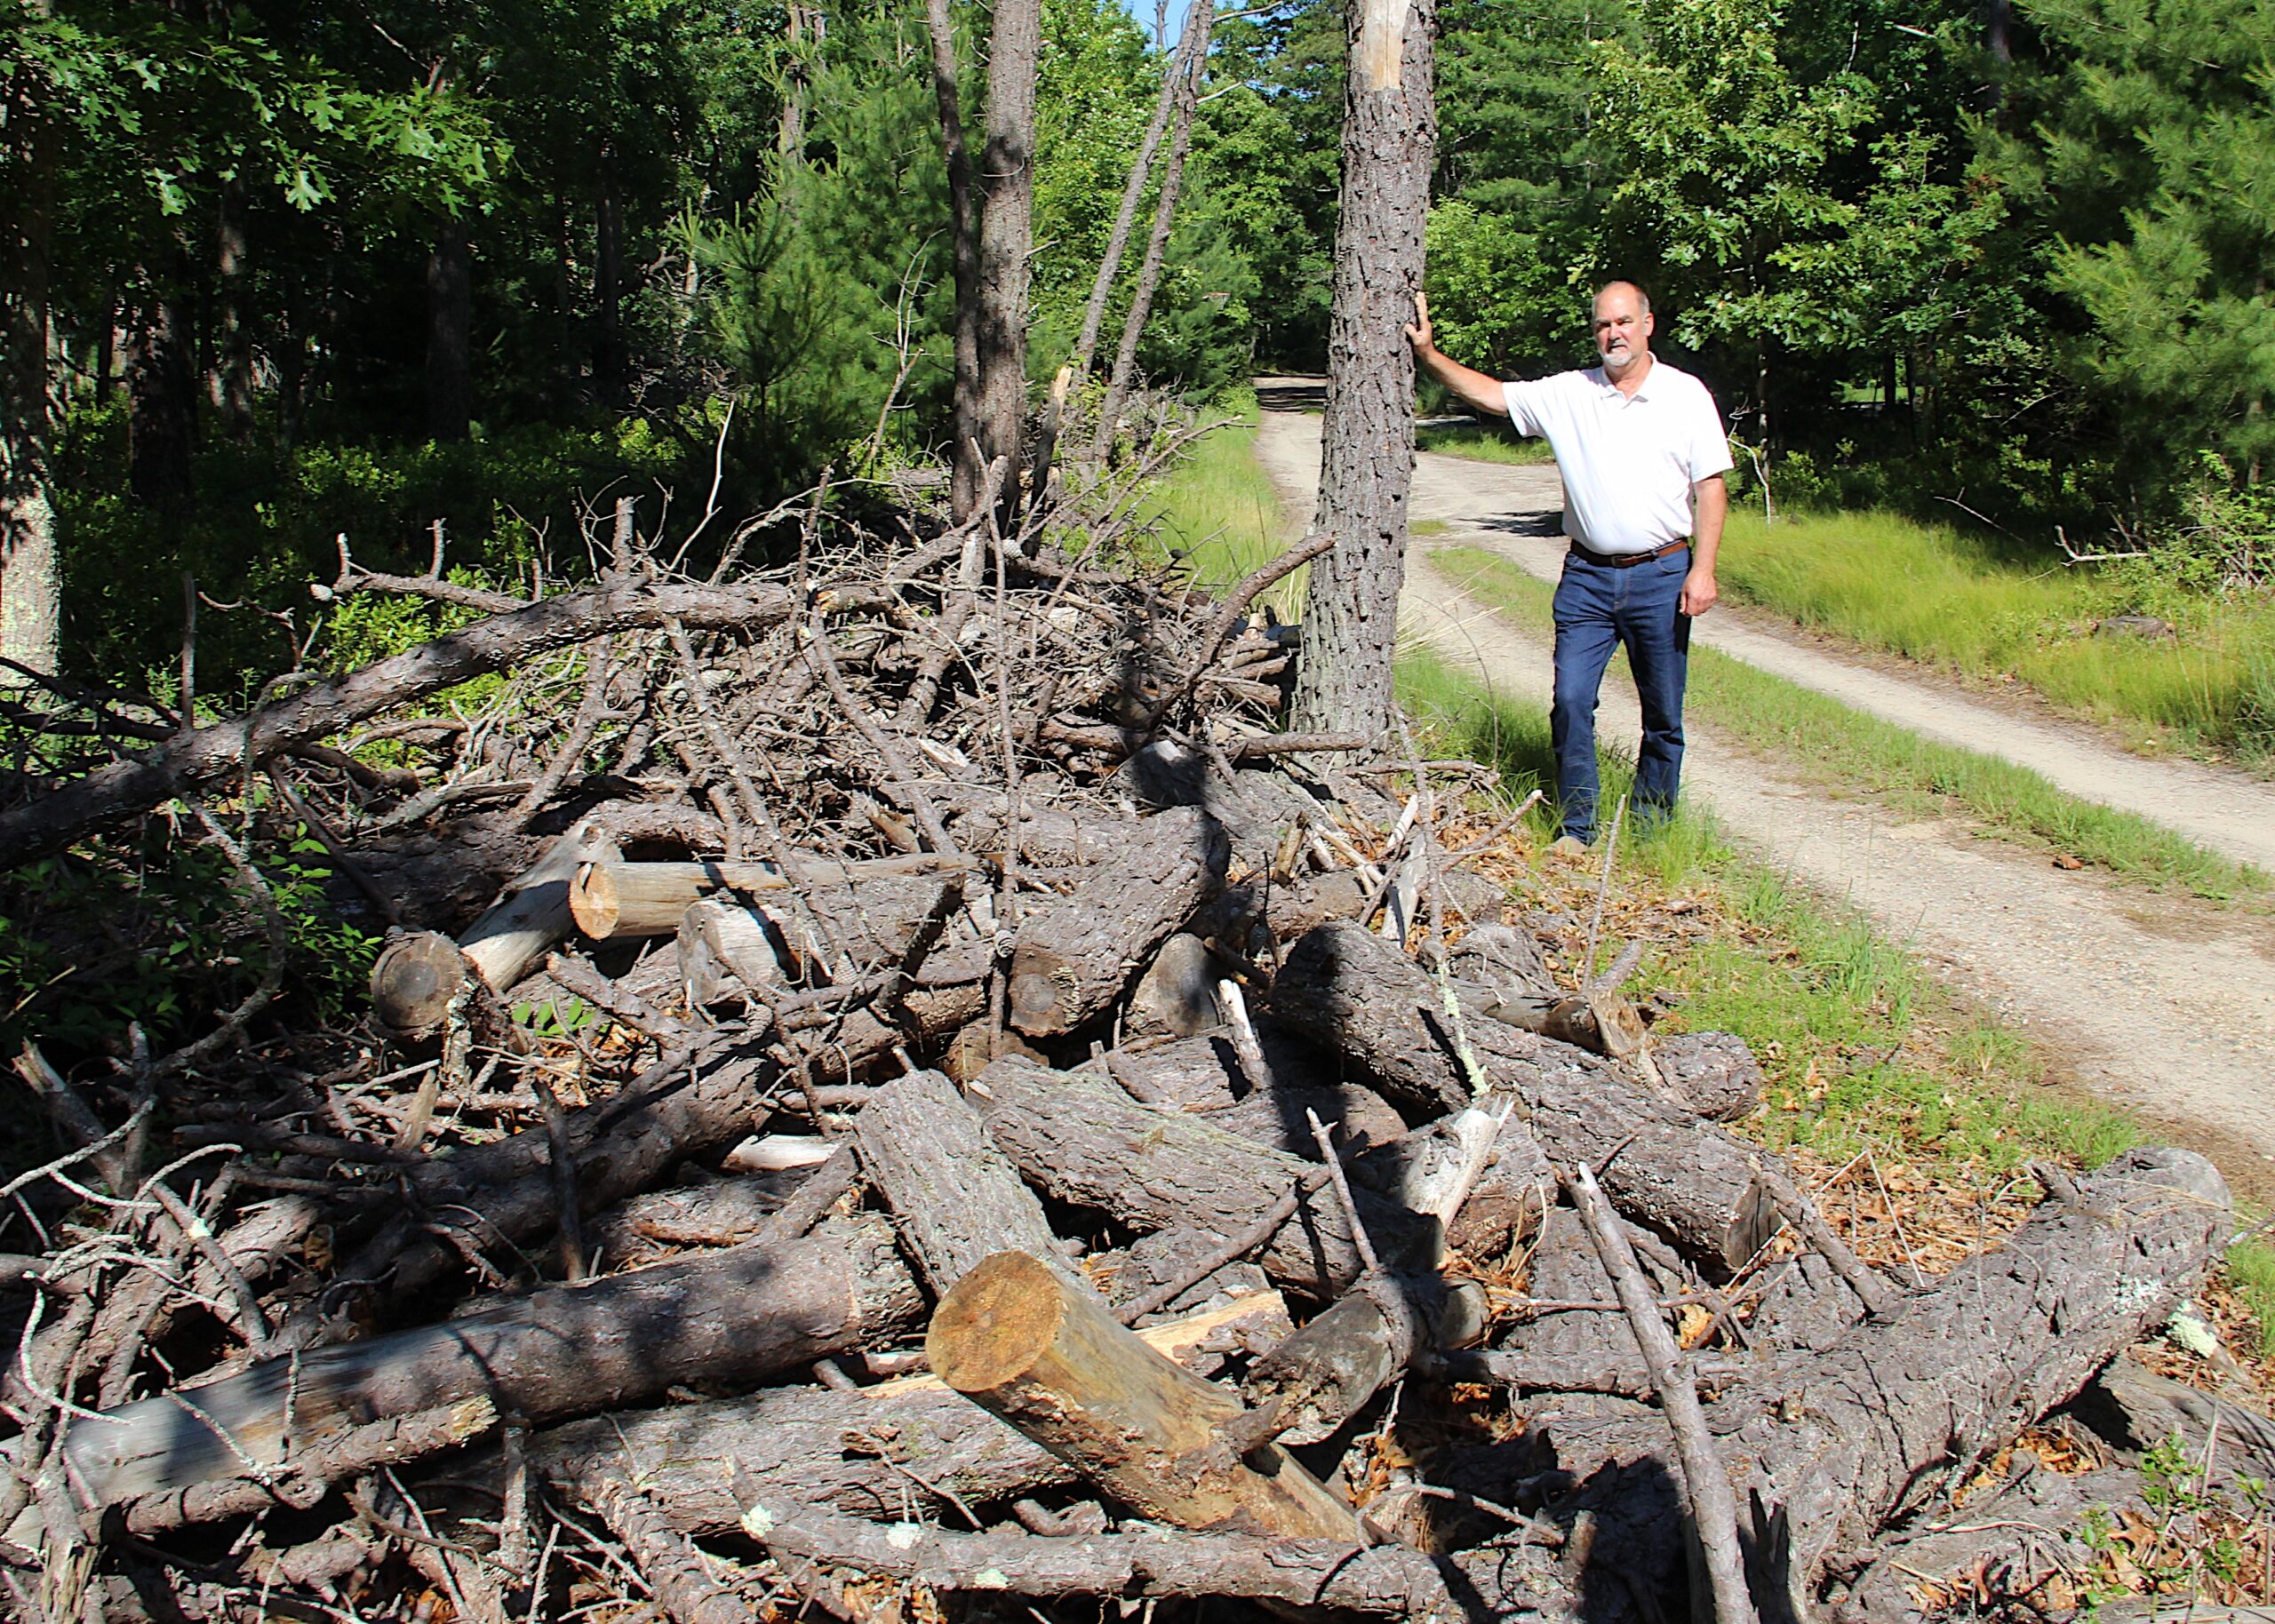 Peter Van Scoyoc with some of the aftermath following a southern pine beetle infestation on his property in Northwest Woods. KYRIL BROMLEY